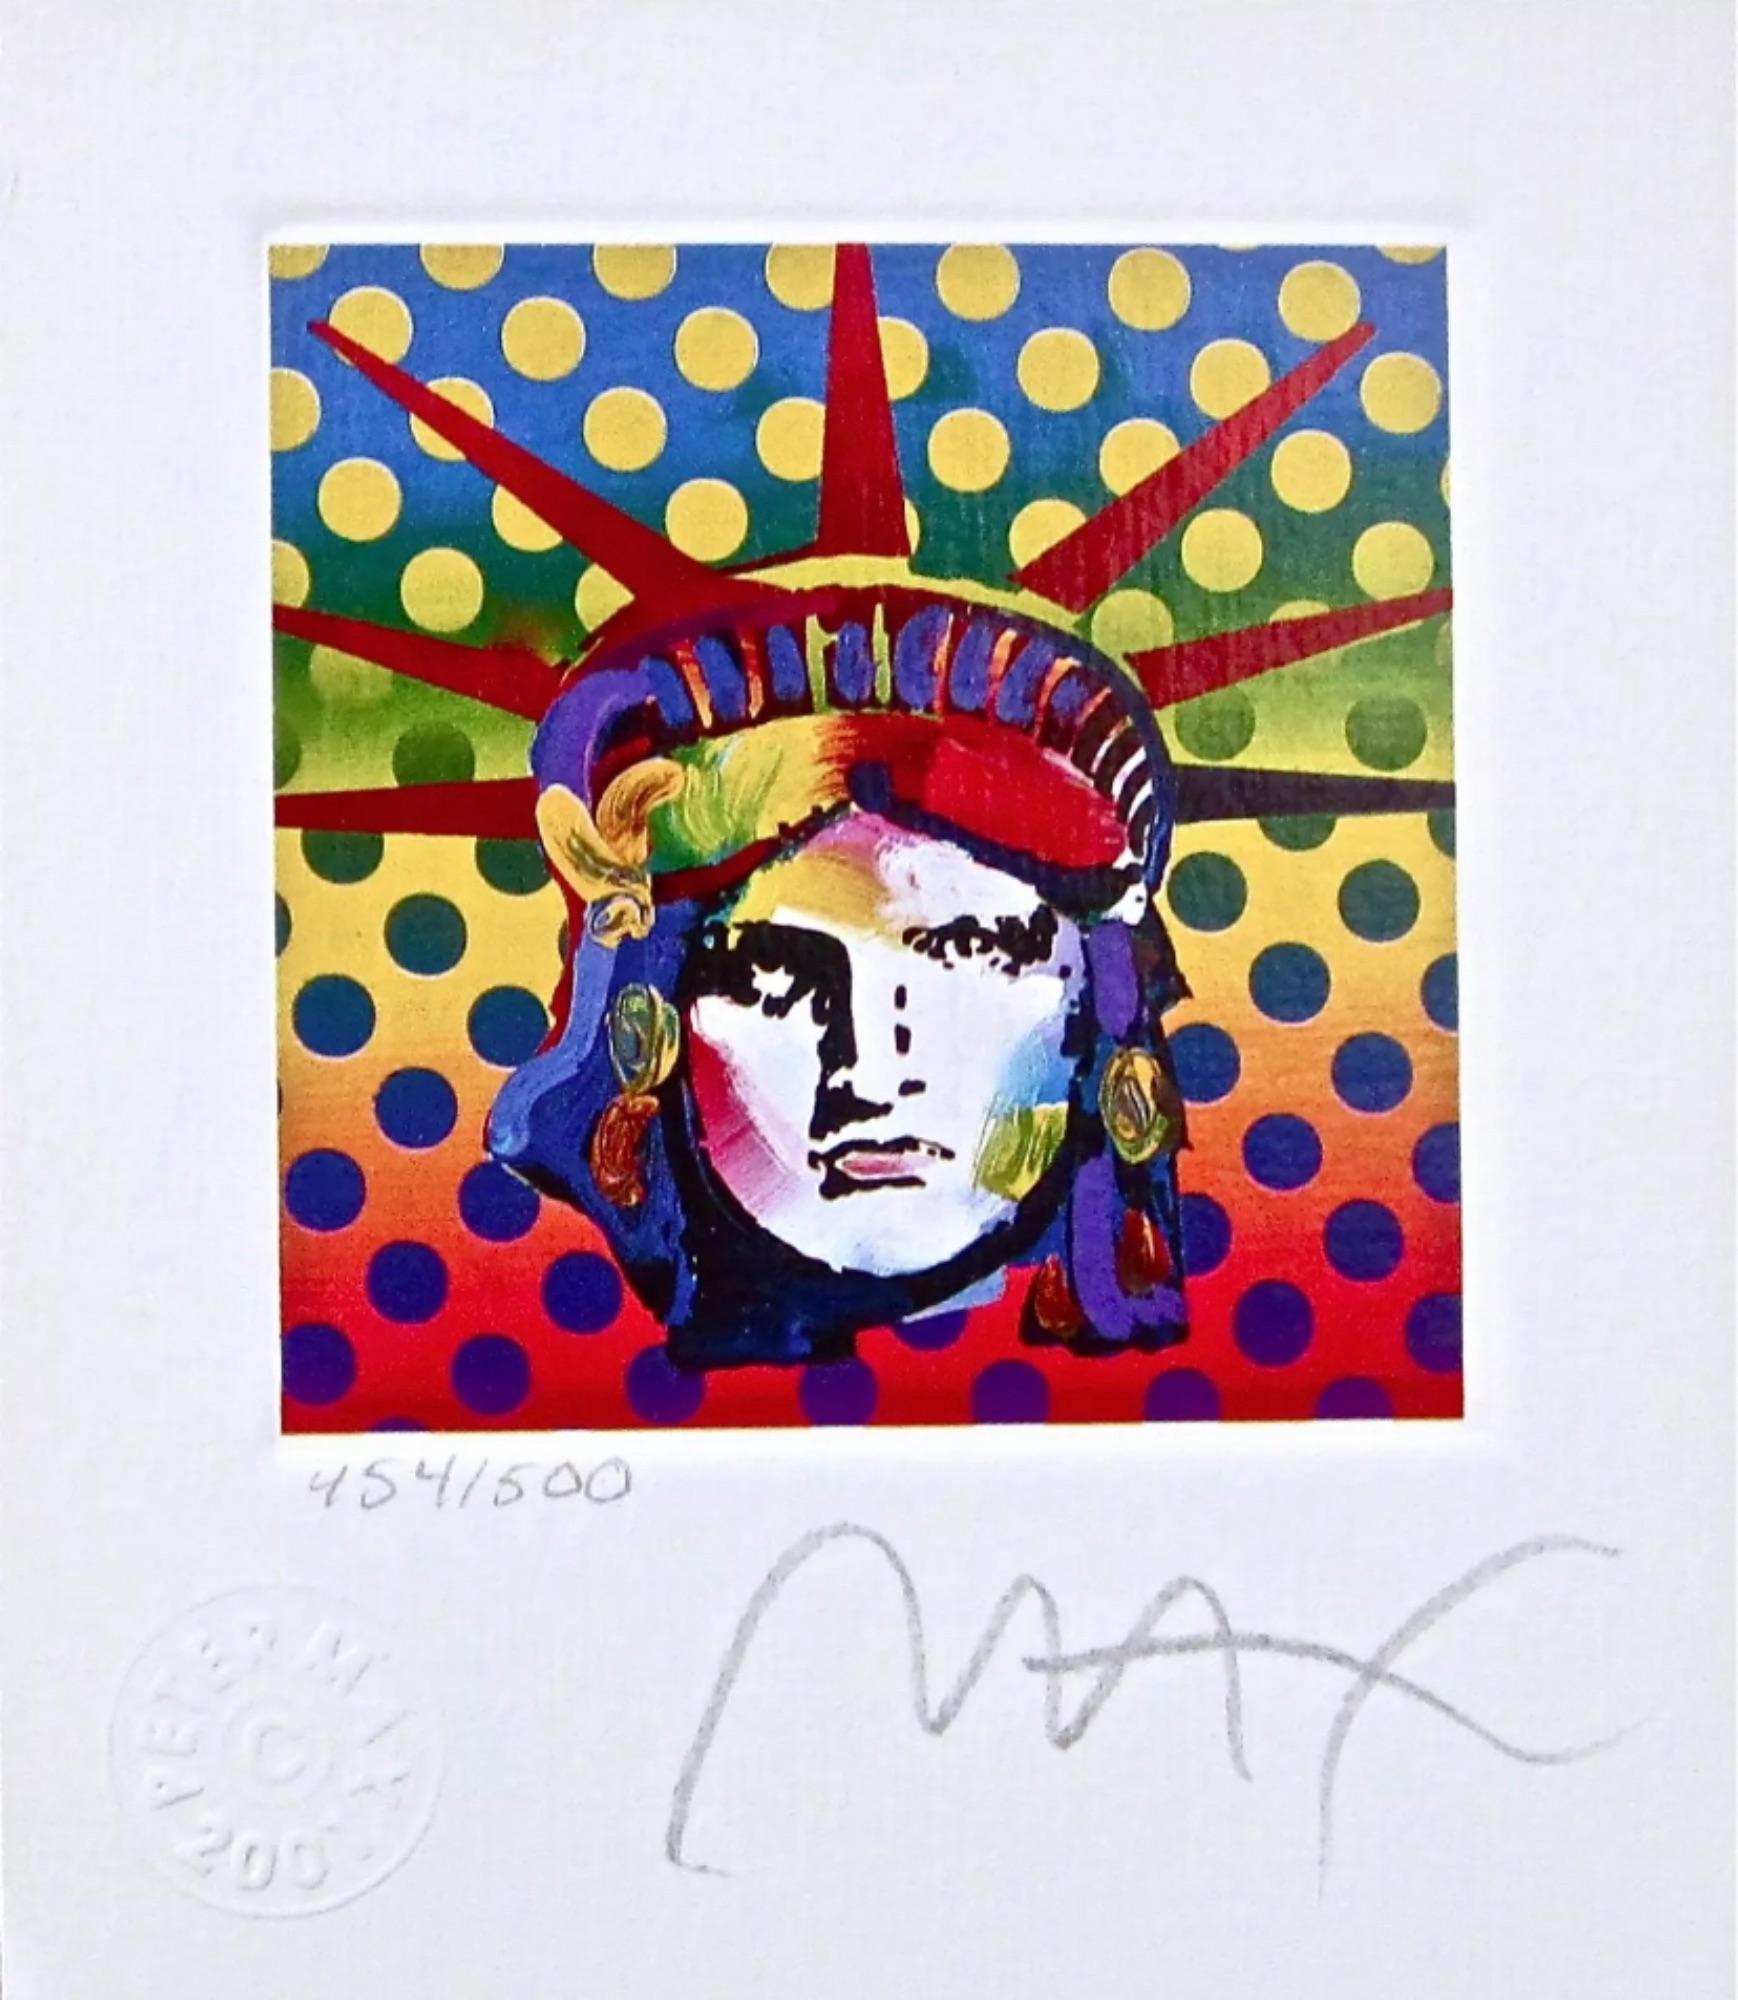 Artist: Peter Max (1937)
Title: Liberty Head V
Year: 2001
Edition: 500, plus proofs
Medium: Lithograph on Lustro Saxony paper
Size: 3.5 x 3 inches
Condition: Excellent
Inscription: Signed and numbered by the artist.
Notes: Published by Via